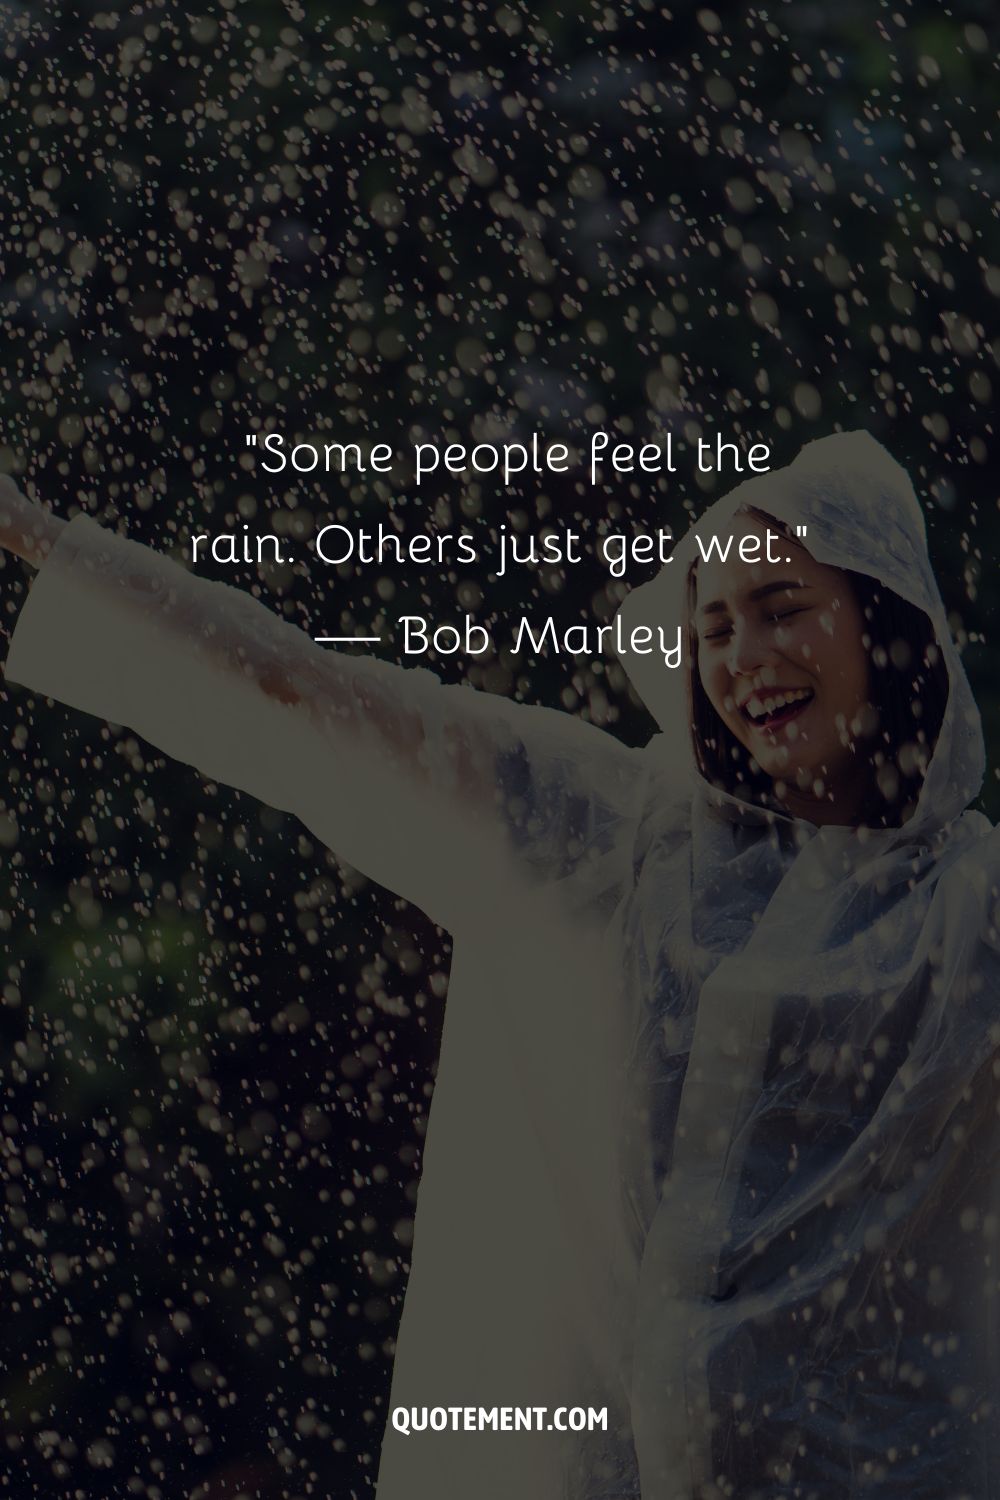 A joyful woman standing in the rain with arms raised representing an amazing rainy day quote
